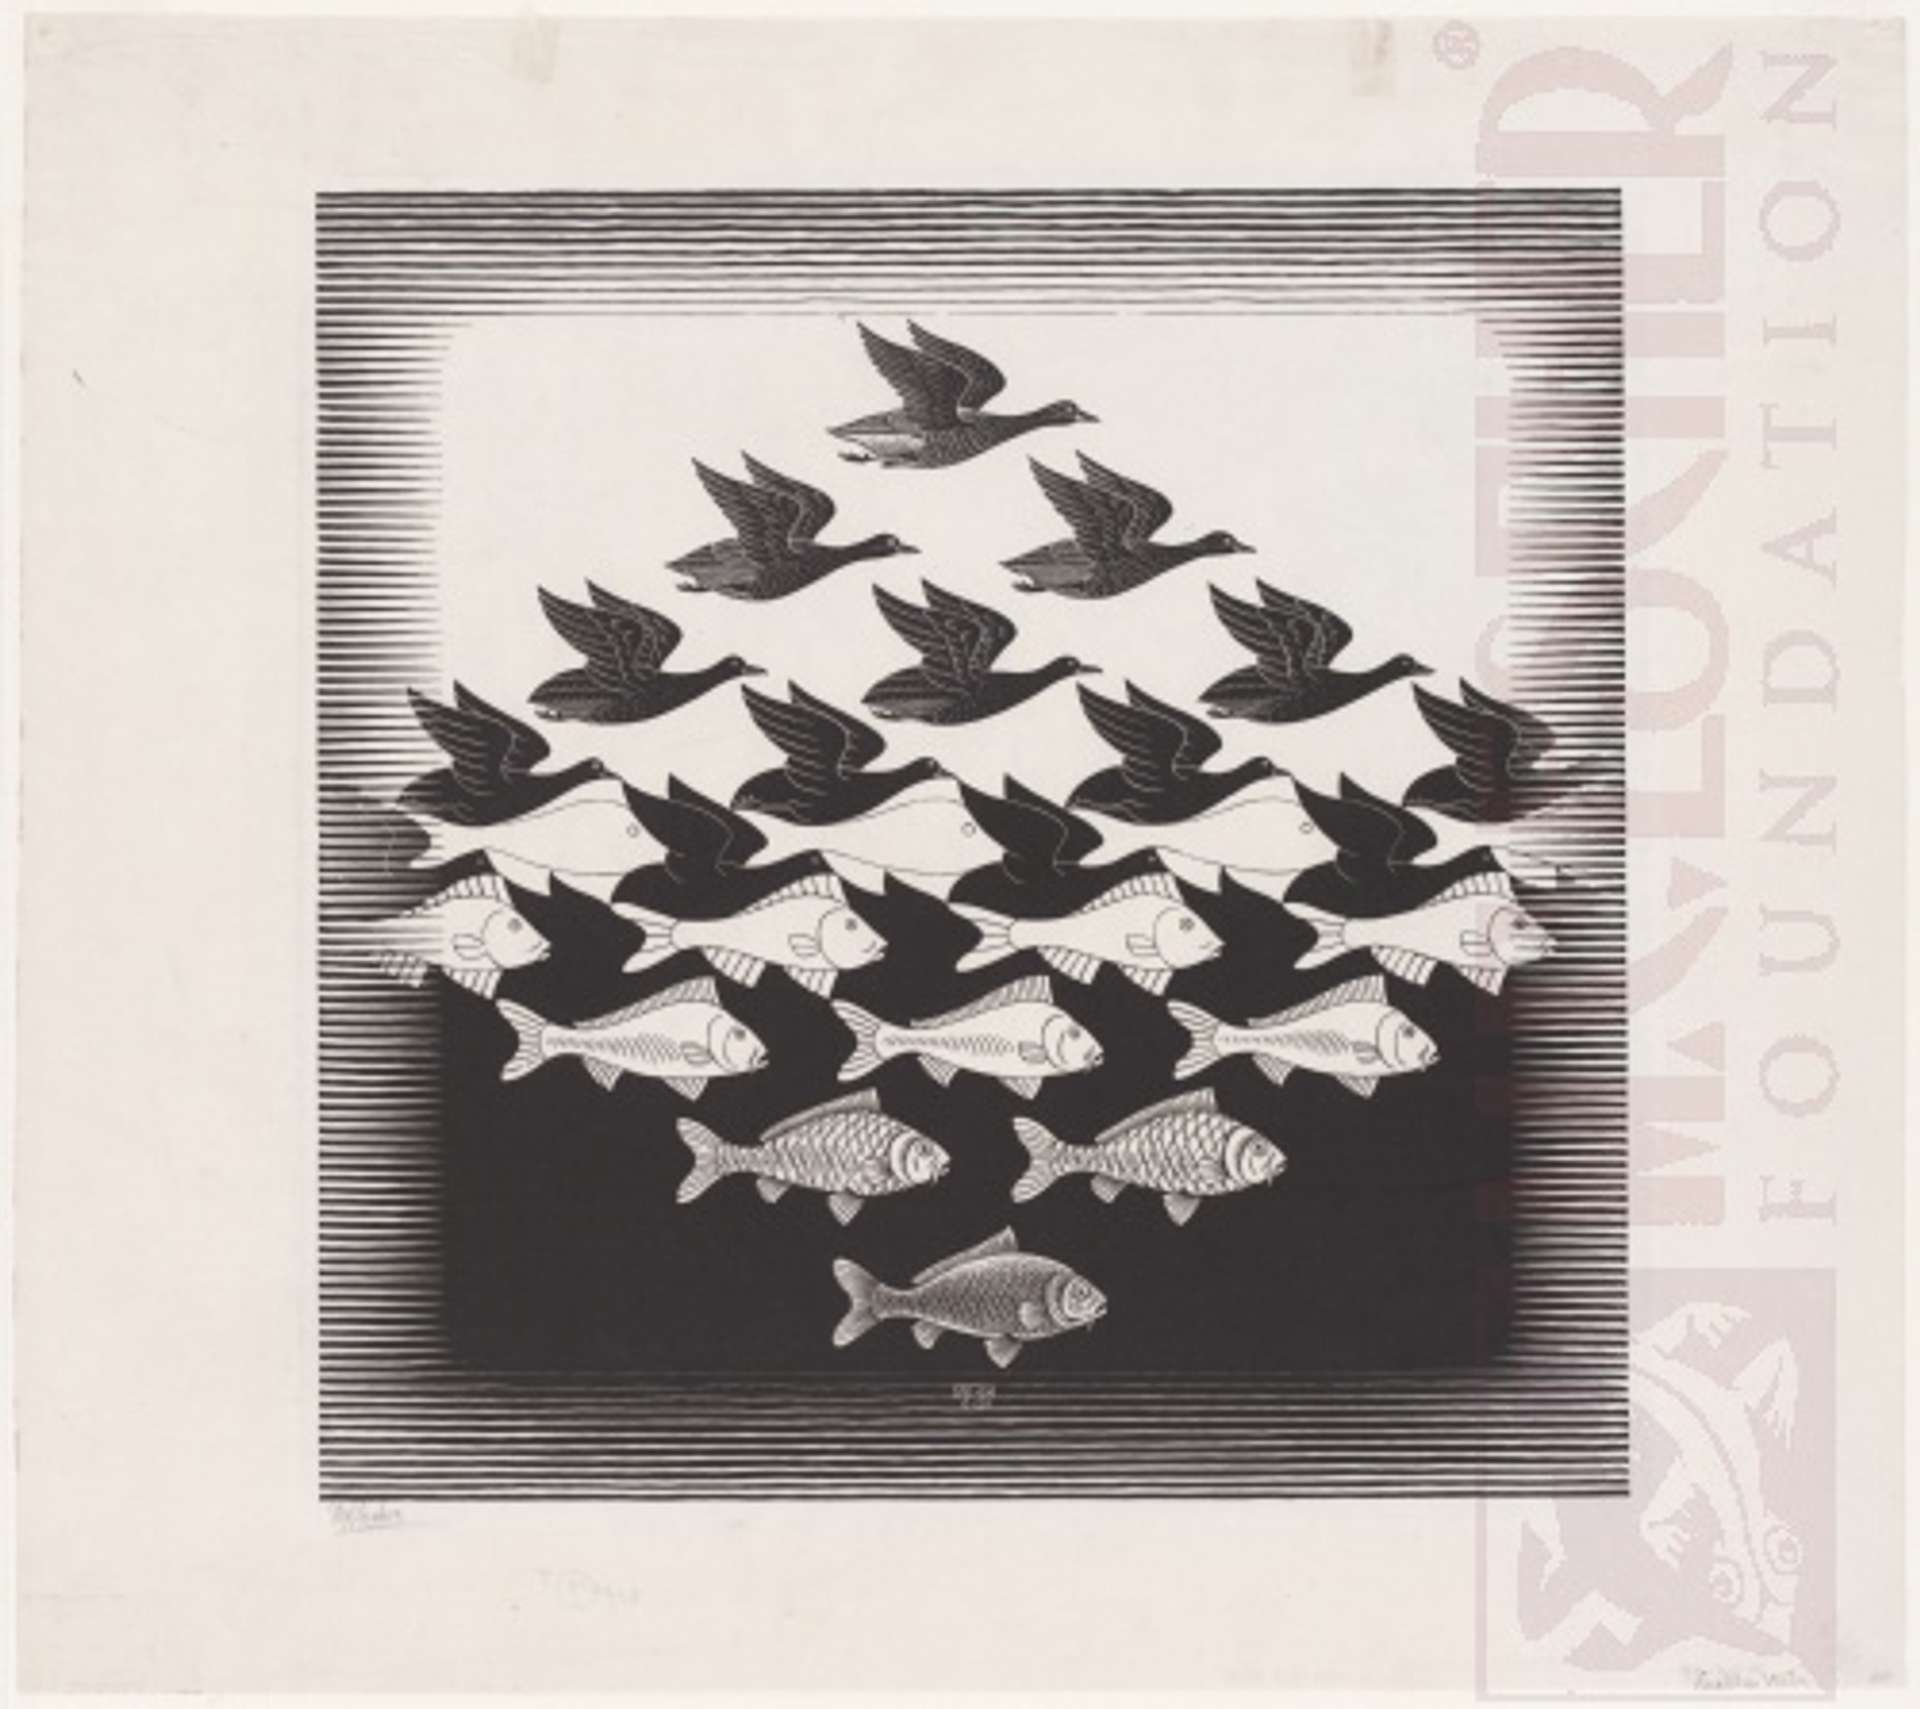 Sky and Water by M. C. Escher. The print shows tesselated fish and birds.